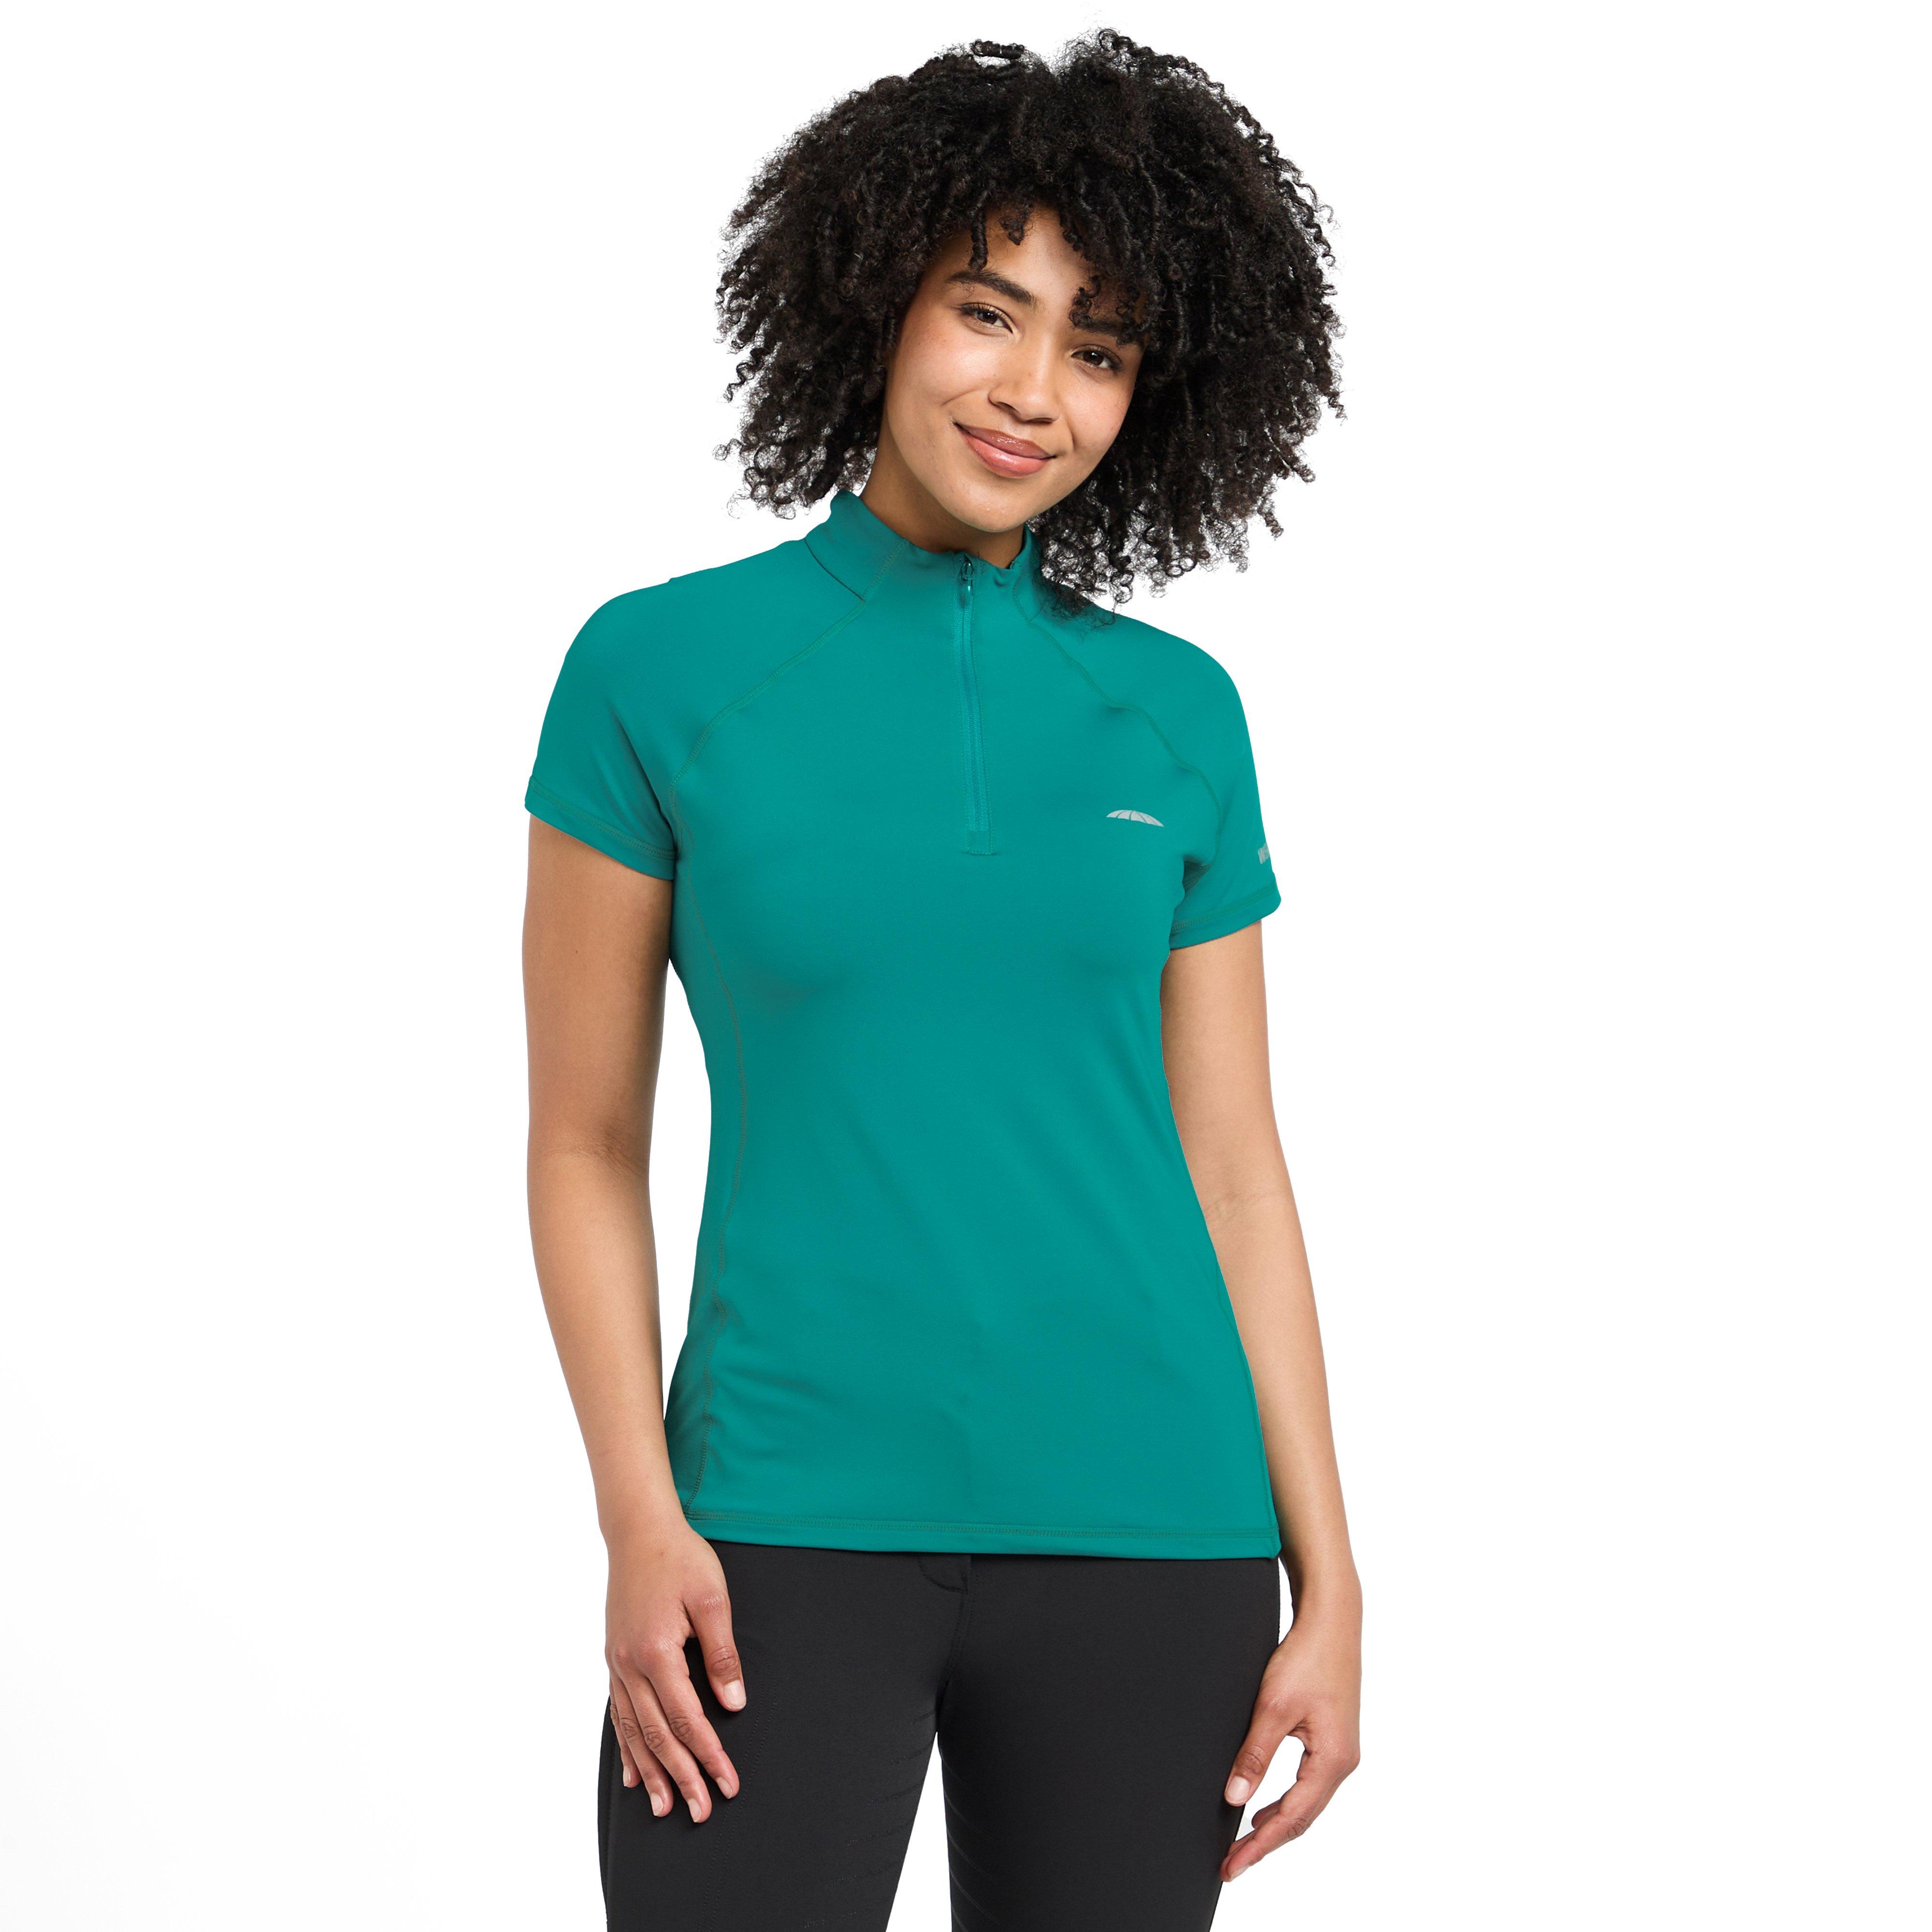 Womens Prime Short Sleeved Top Turquoise